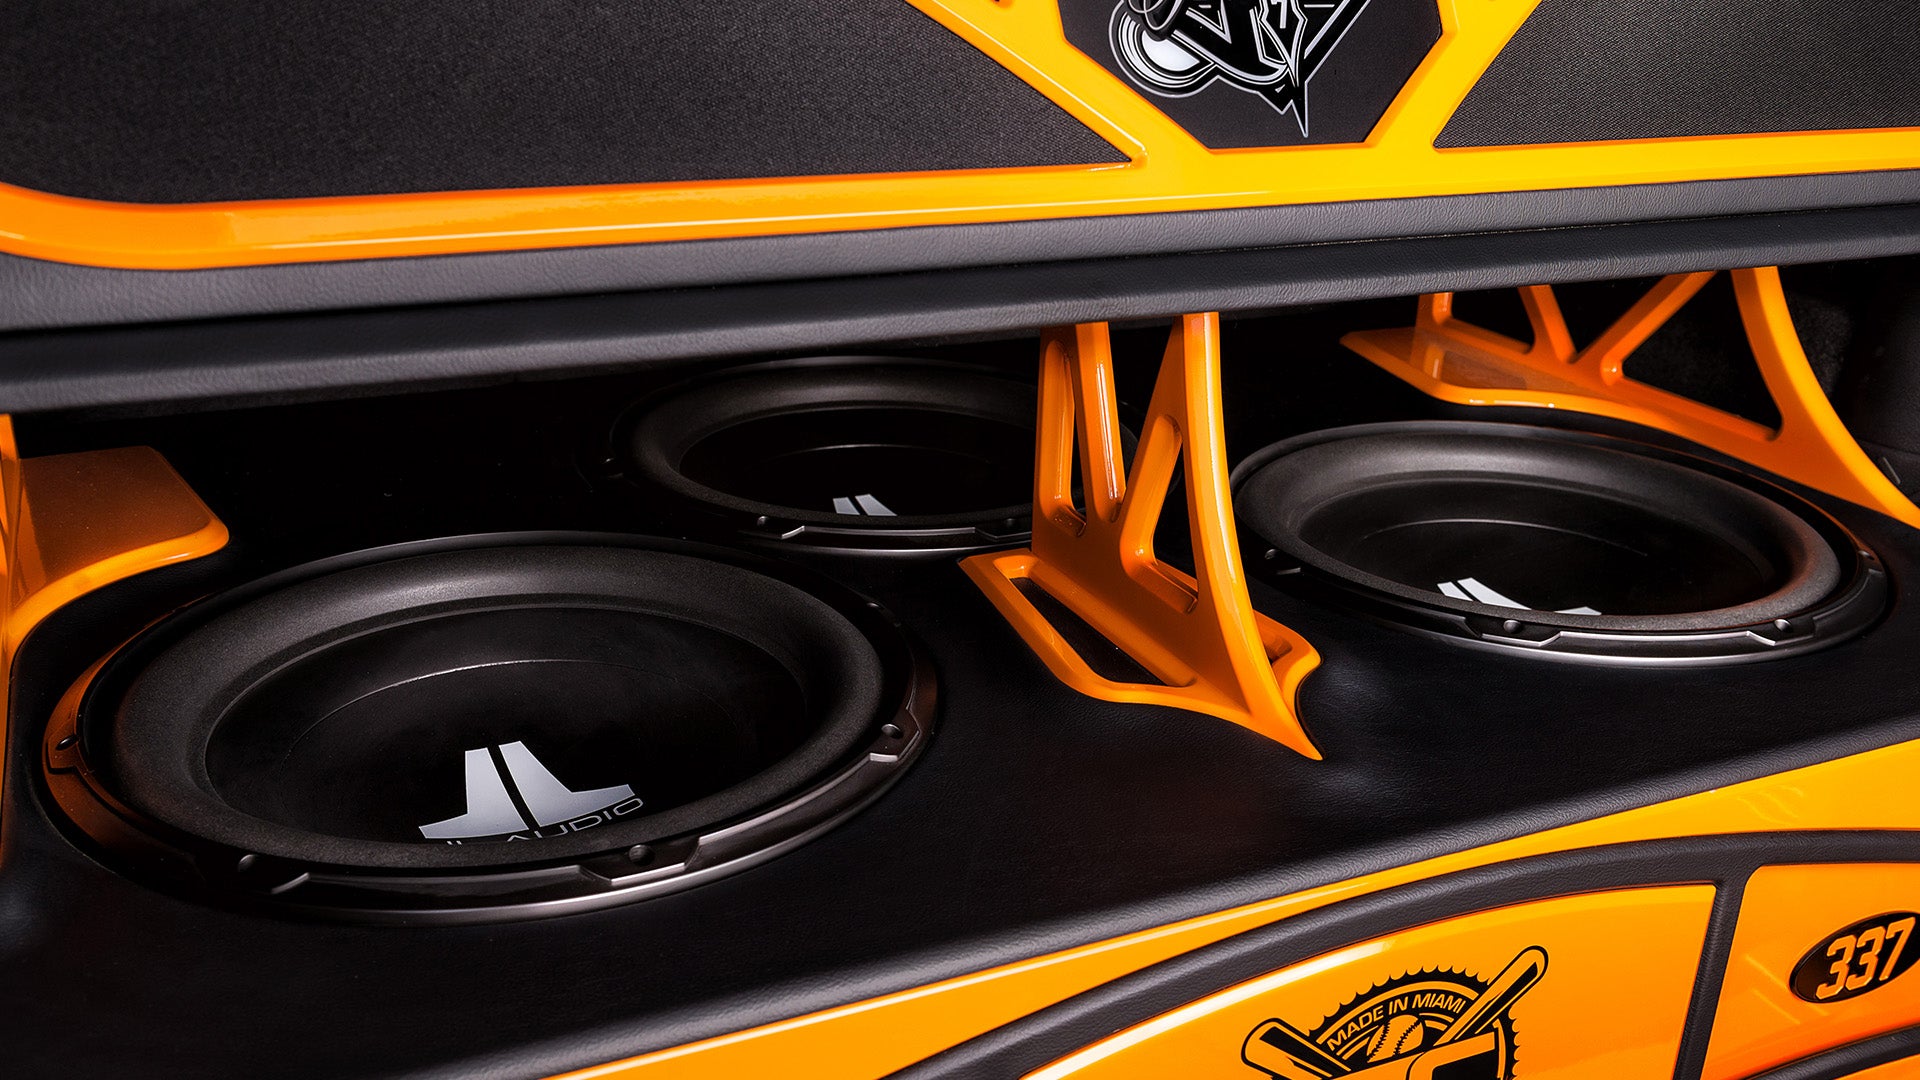 A Jeep vehicle with 3 W0v3 subwoofers.